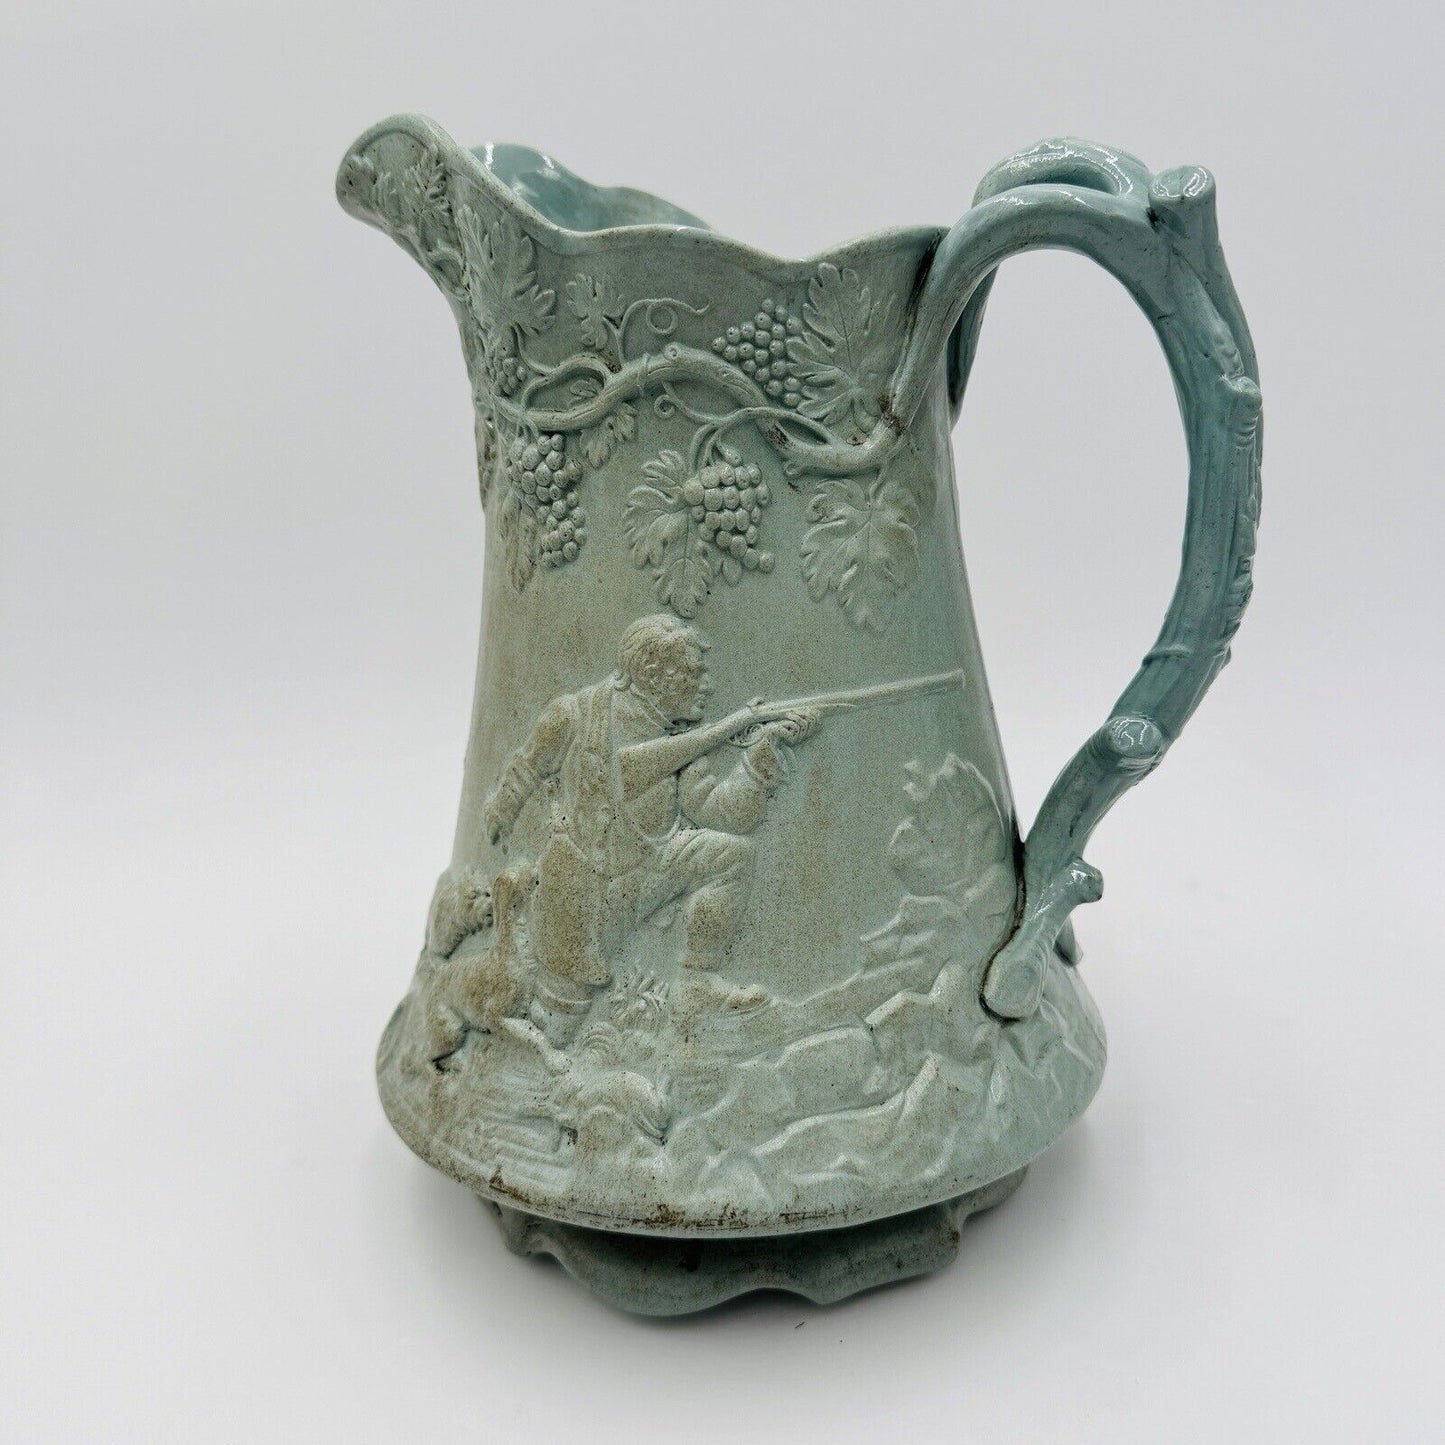 Antique Parian Ware Relief Jug Large Green Pottery Embossed Grapes